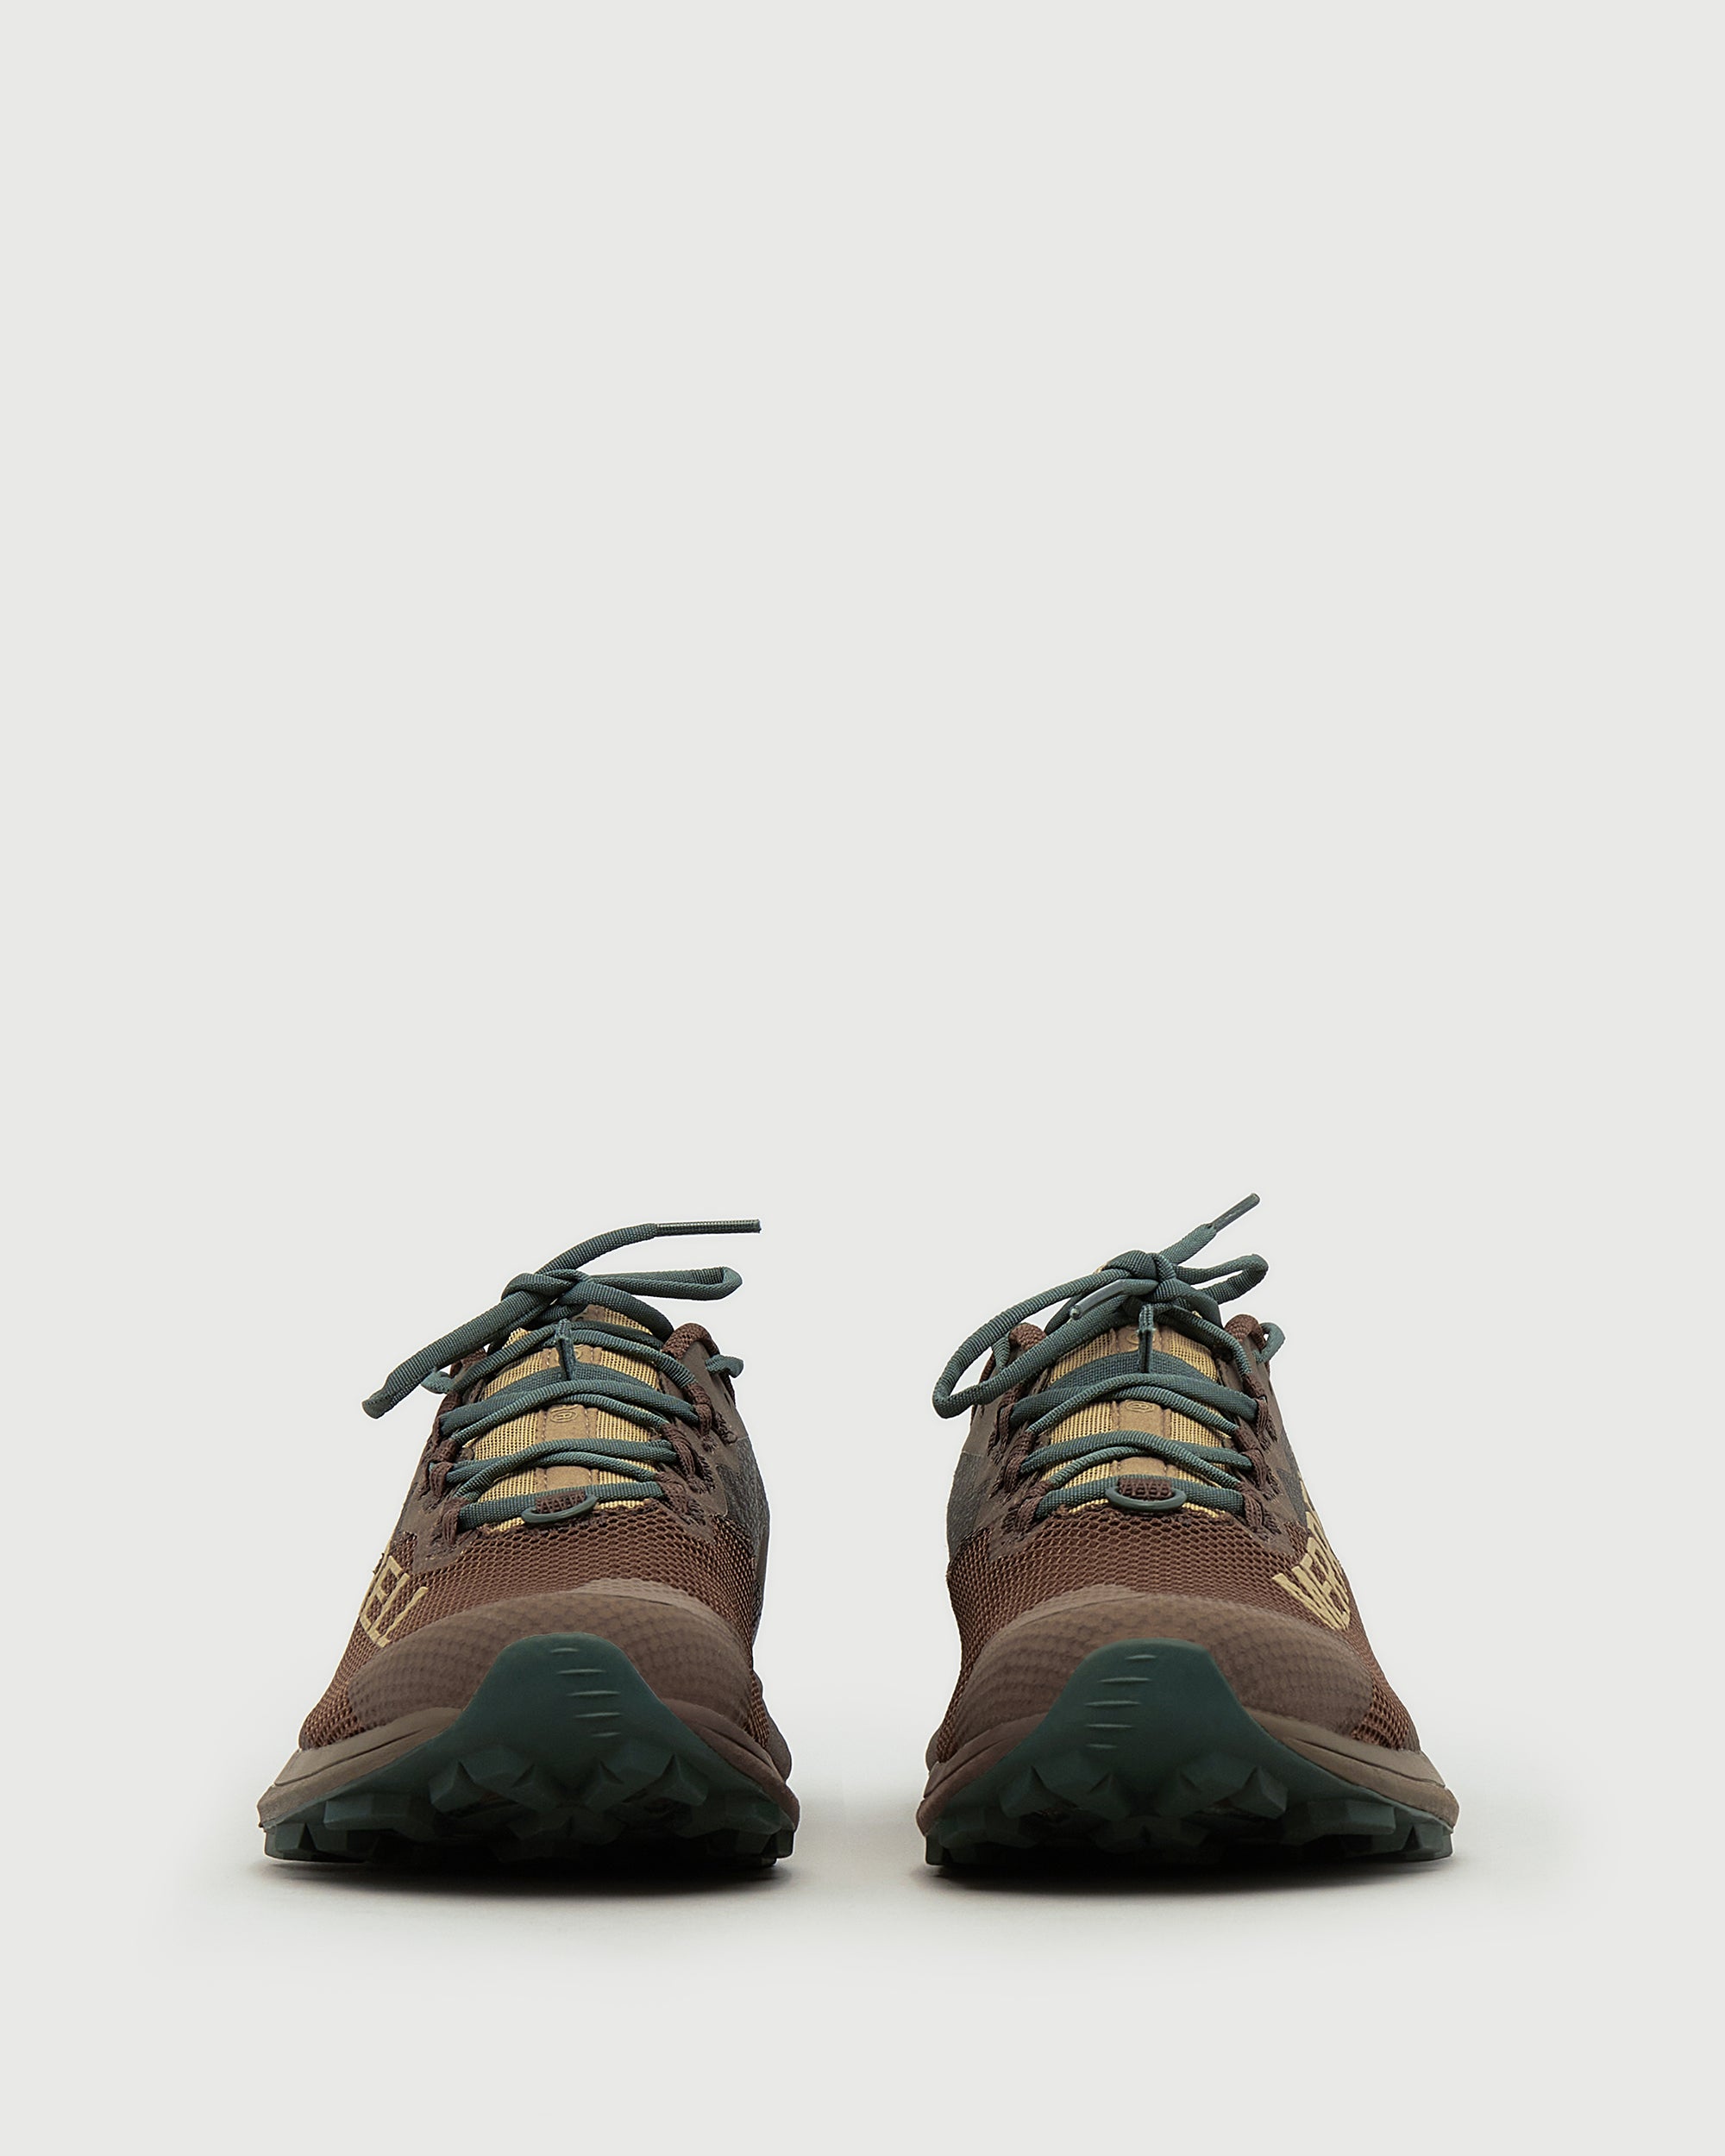 RC x Merrell MTL Long in Otter – REESE COOPER®